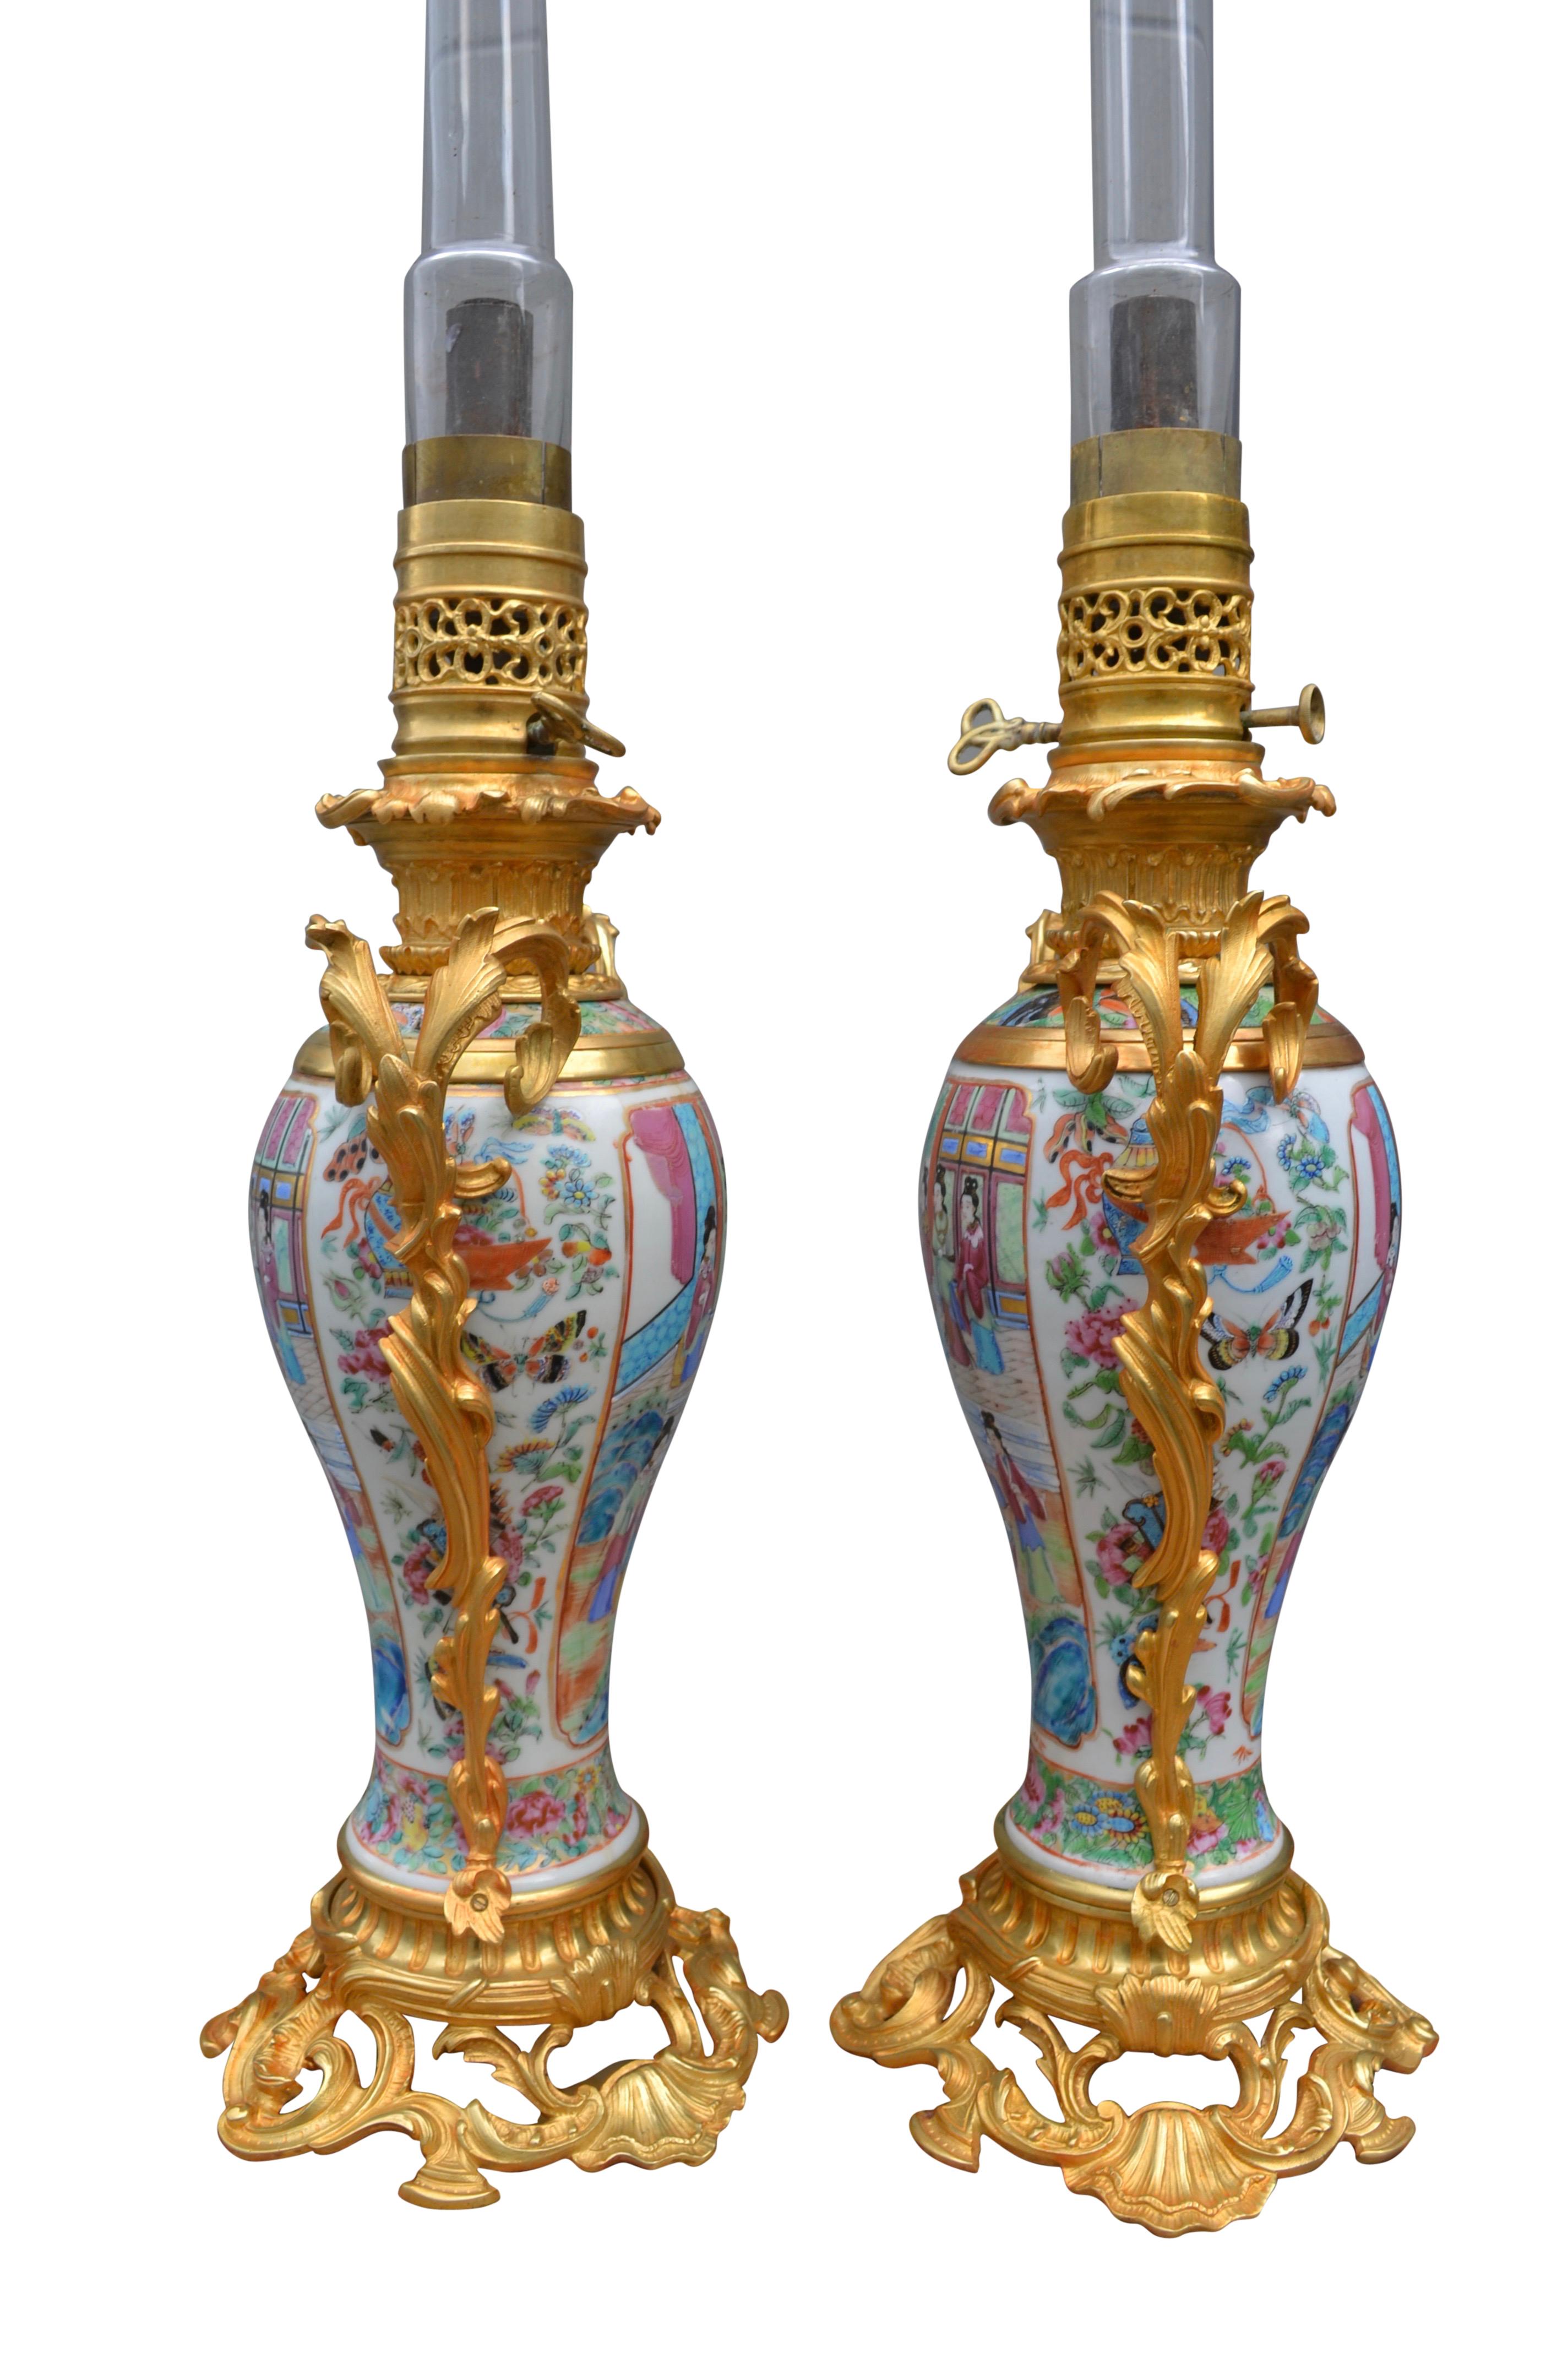 Rare Pair of Famille Rose Porcelain and Ormolu Napoleon III Oil Lamps For Sale 3